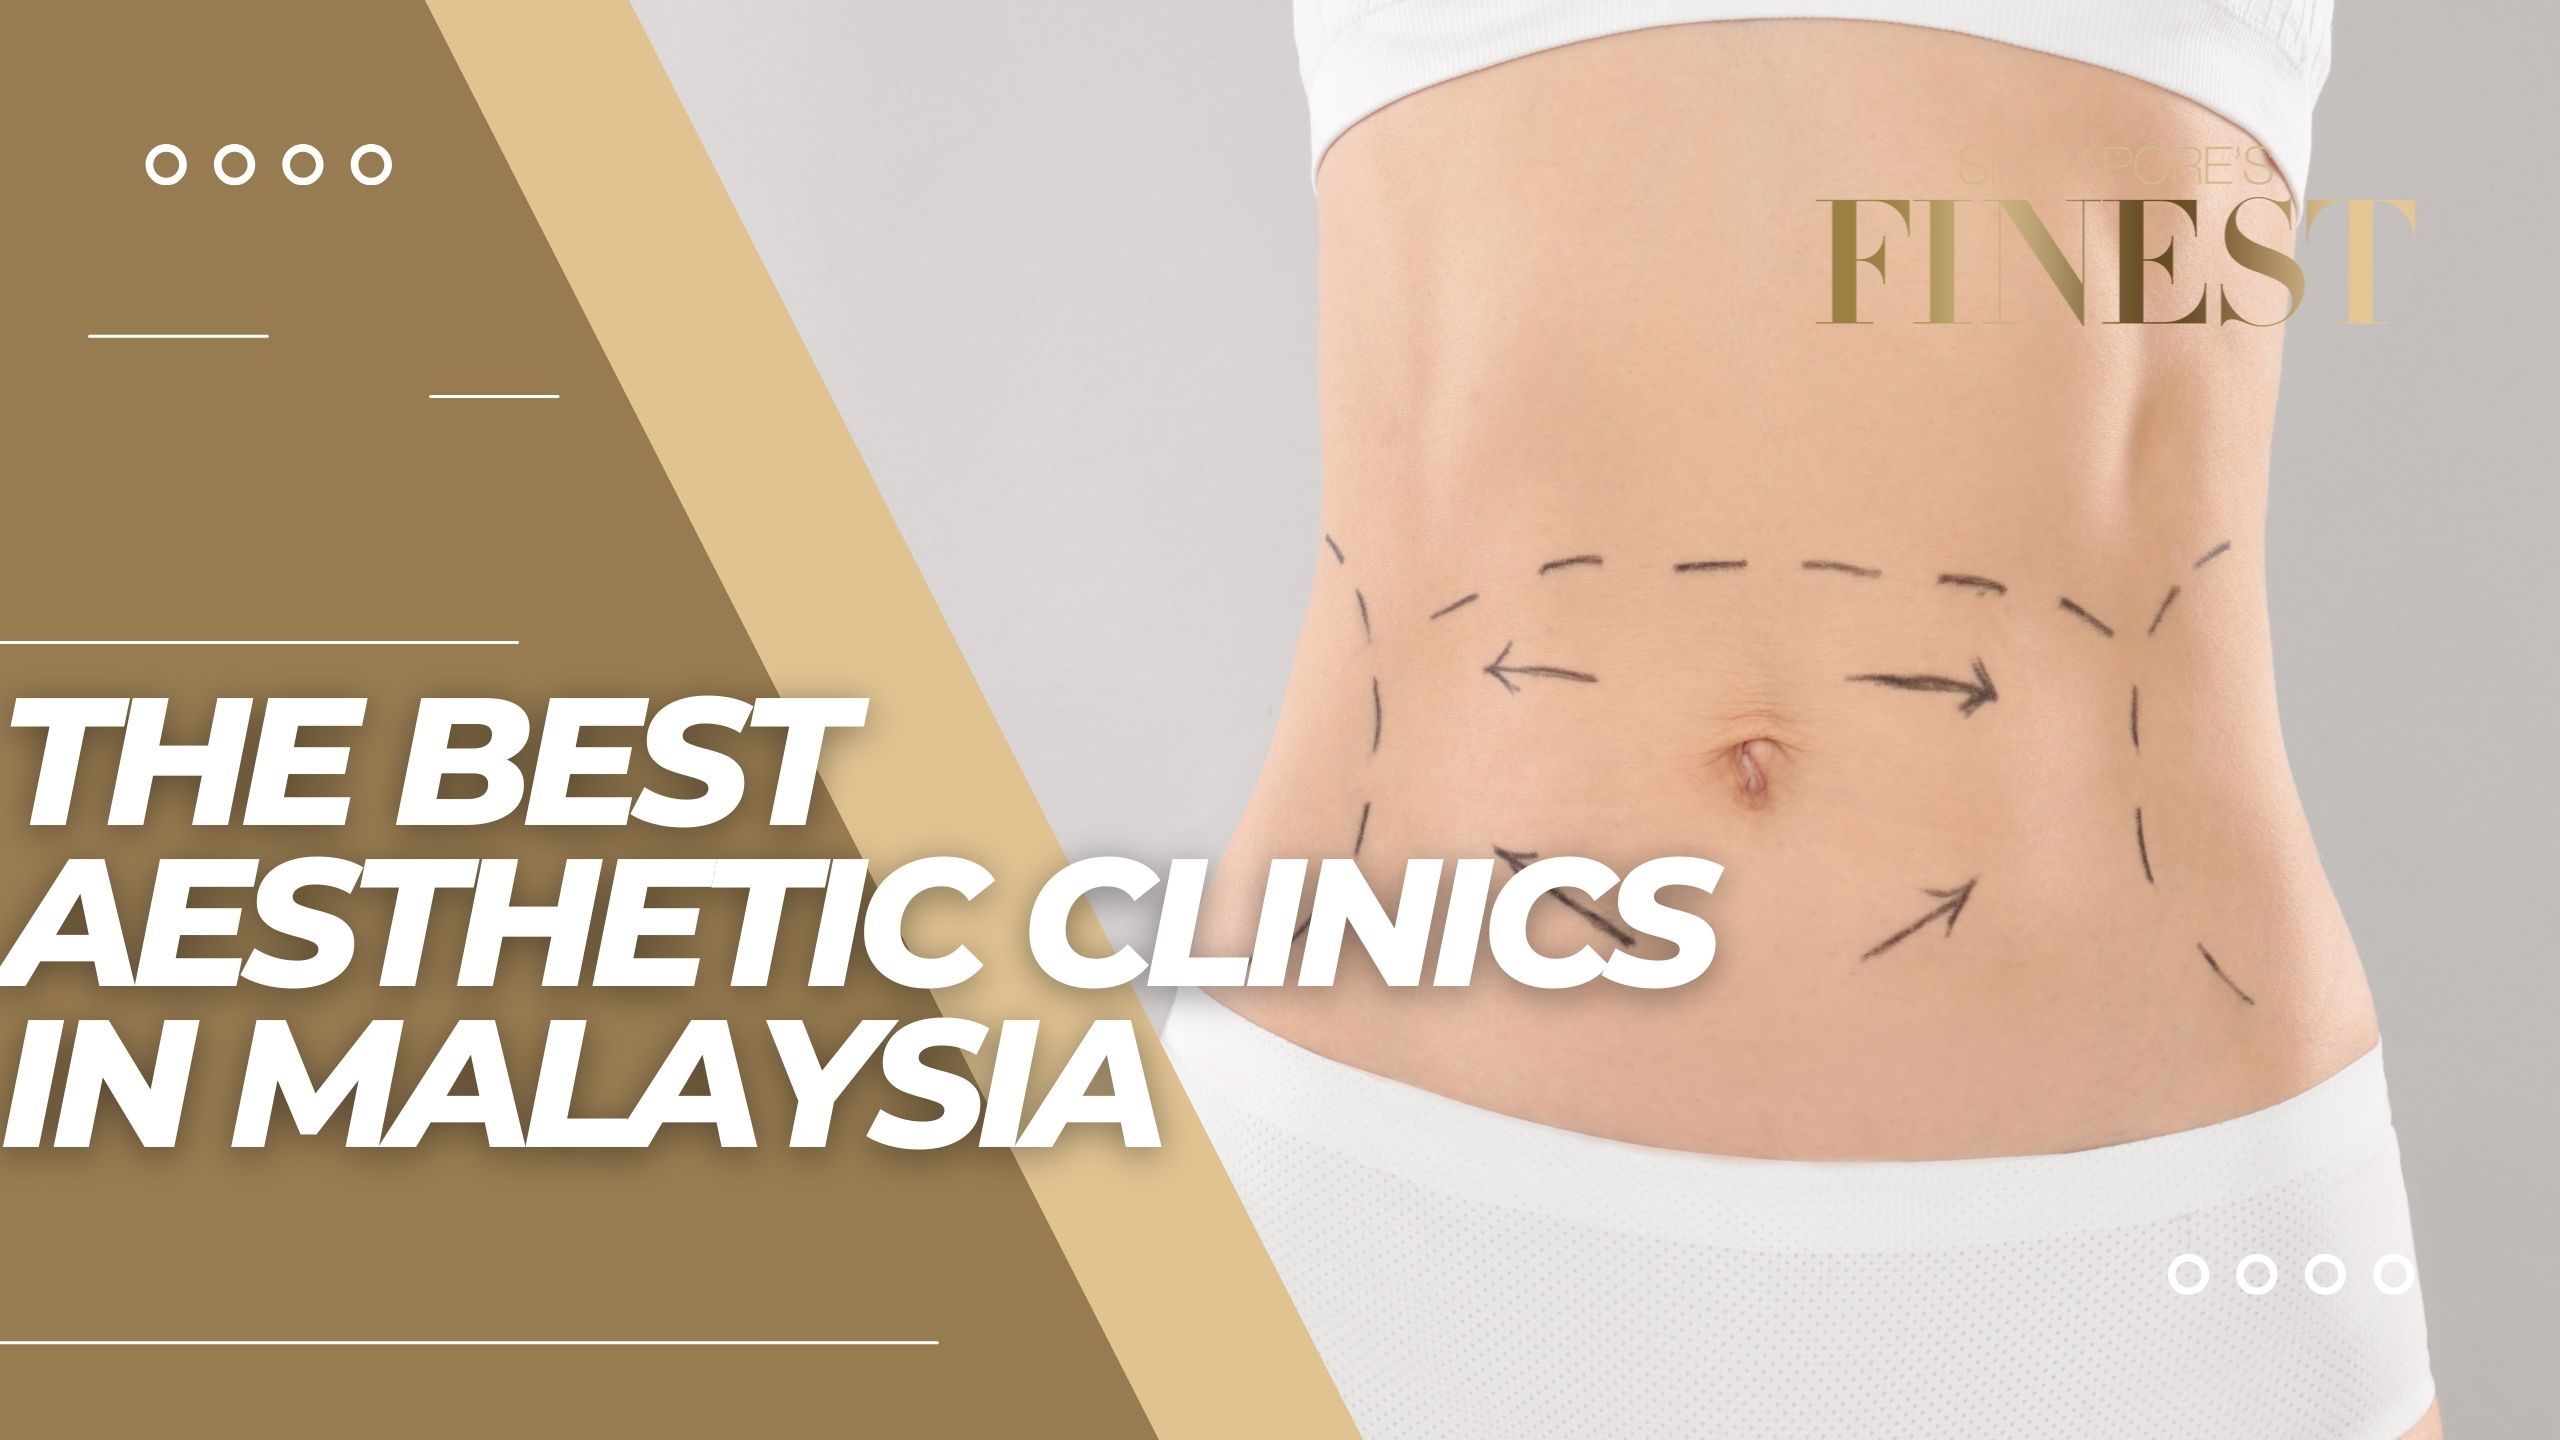 The Finest Aesthetic Clinics in Malaysia